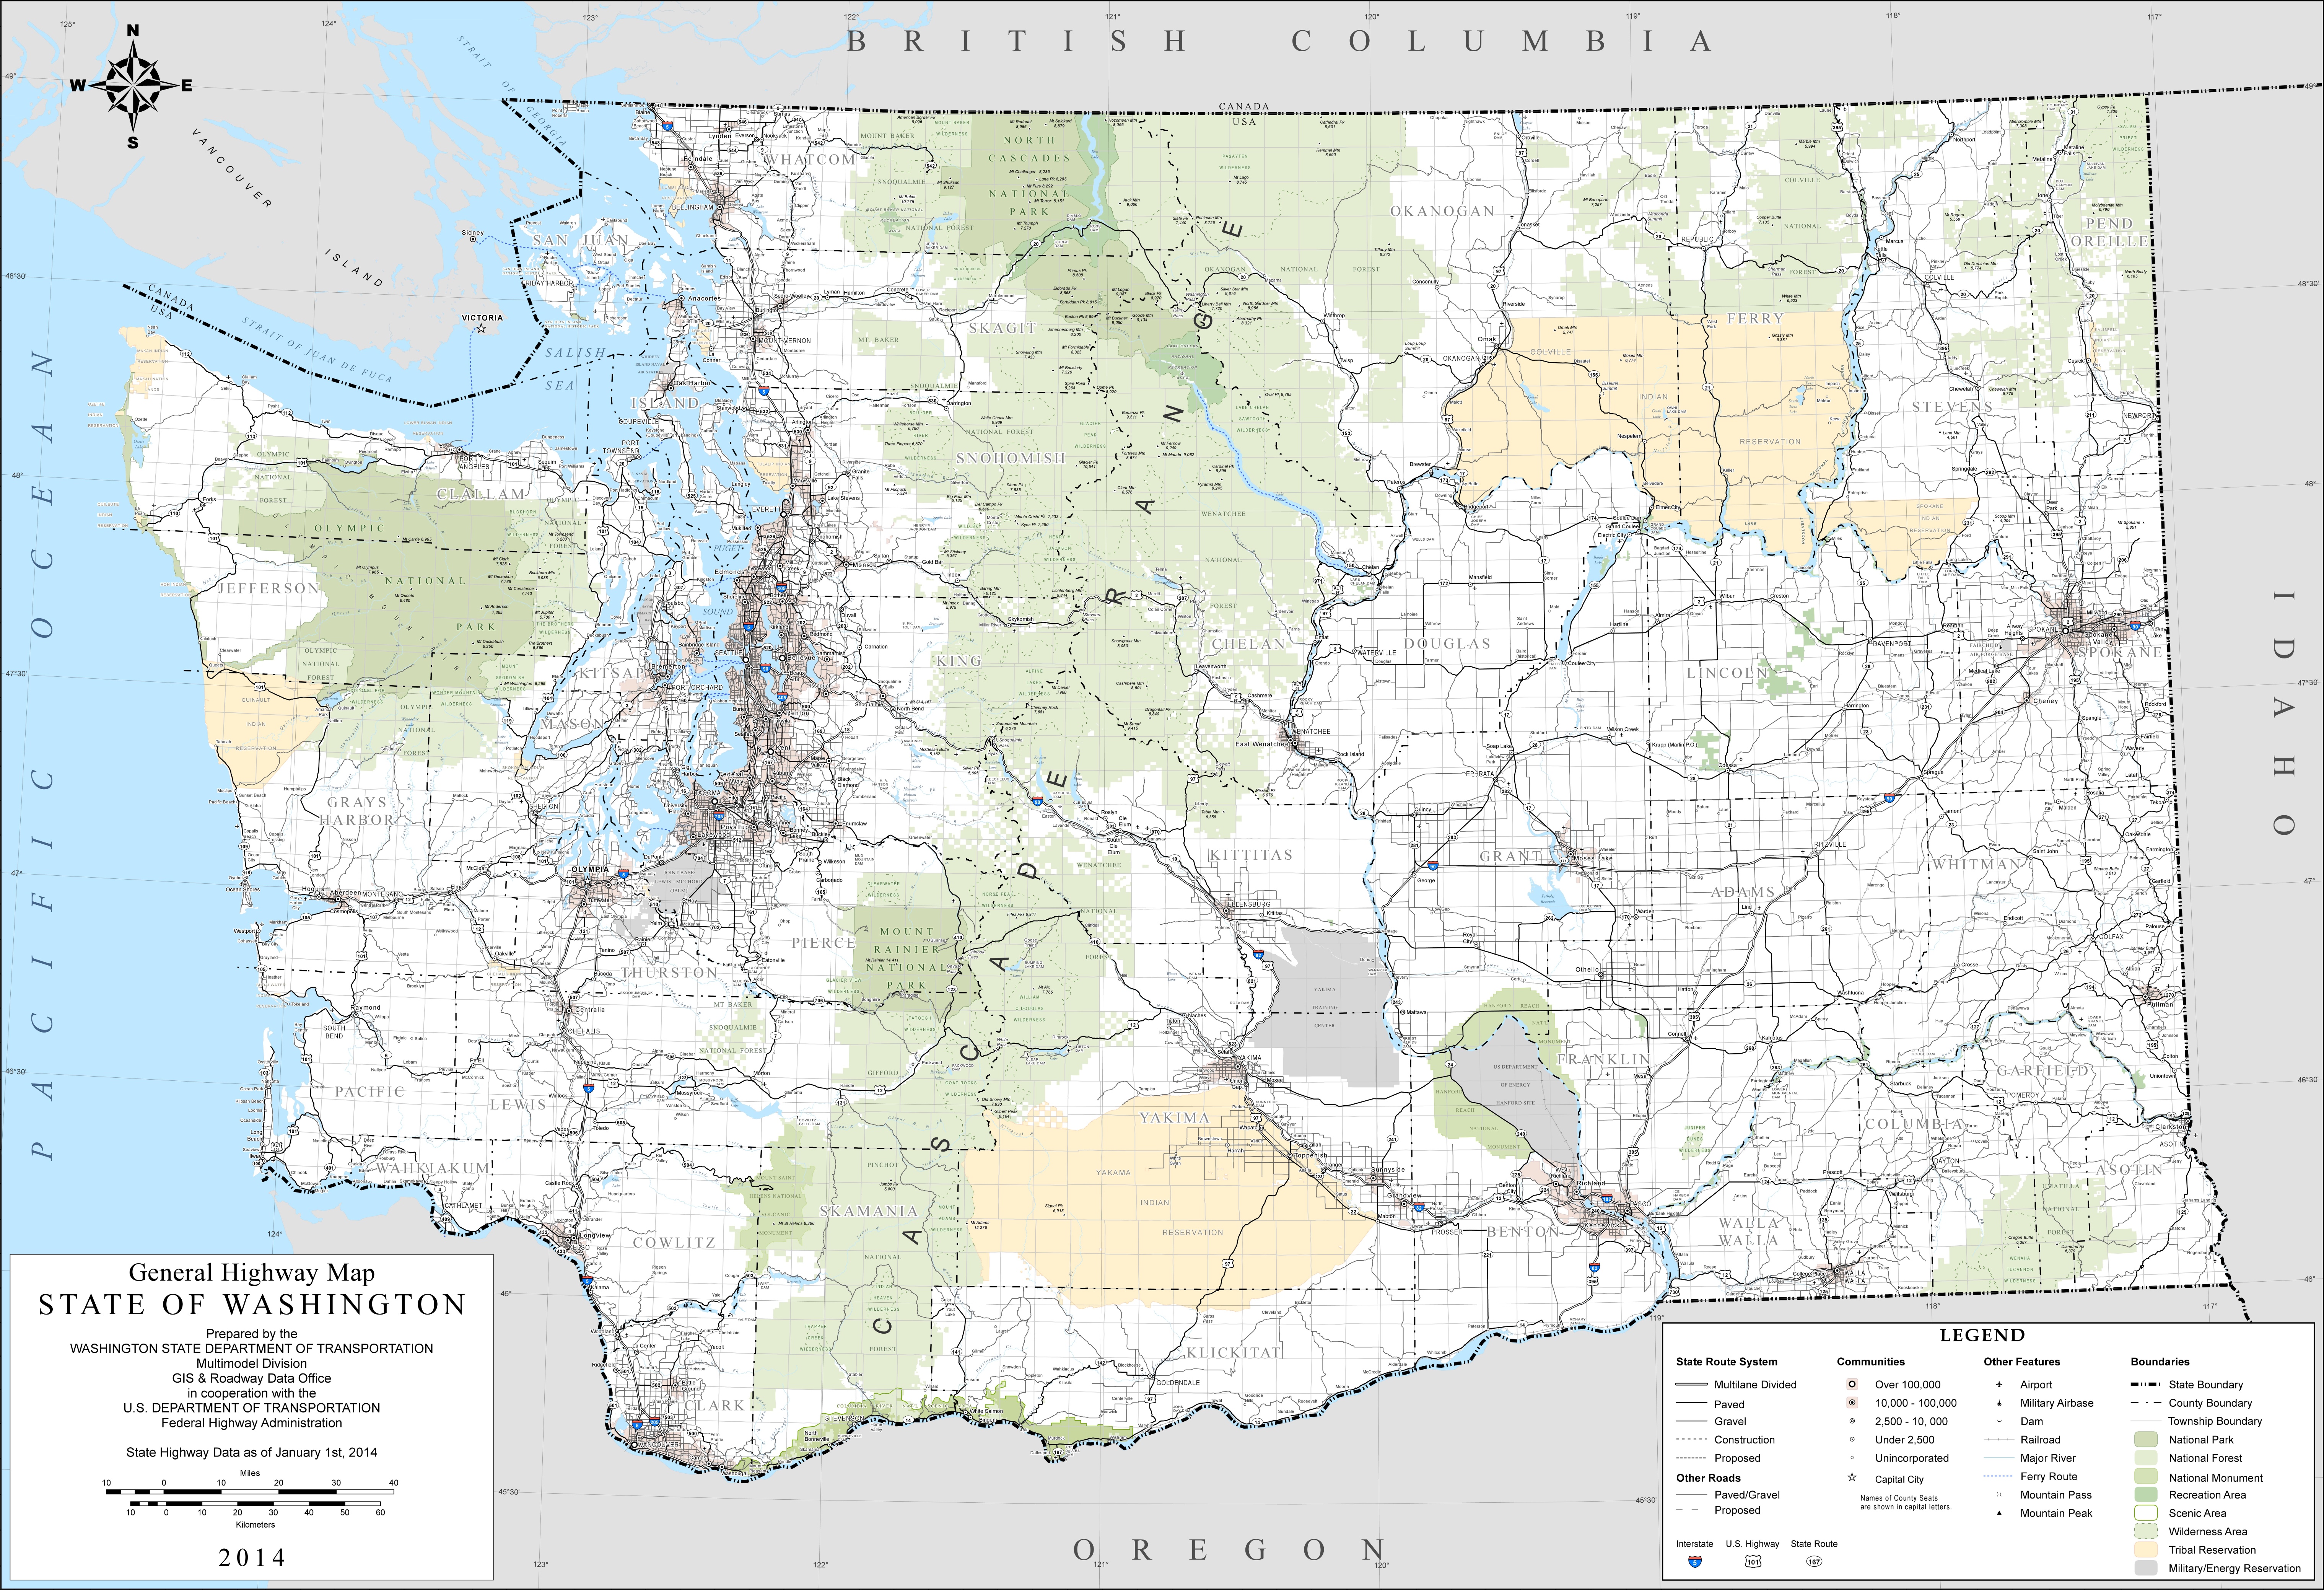 national parks in washington state map Washington National Parks Forests And Monuments Map national parks in washington state map